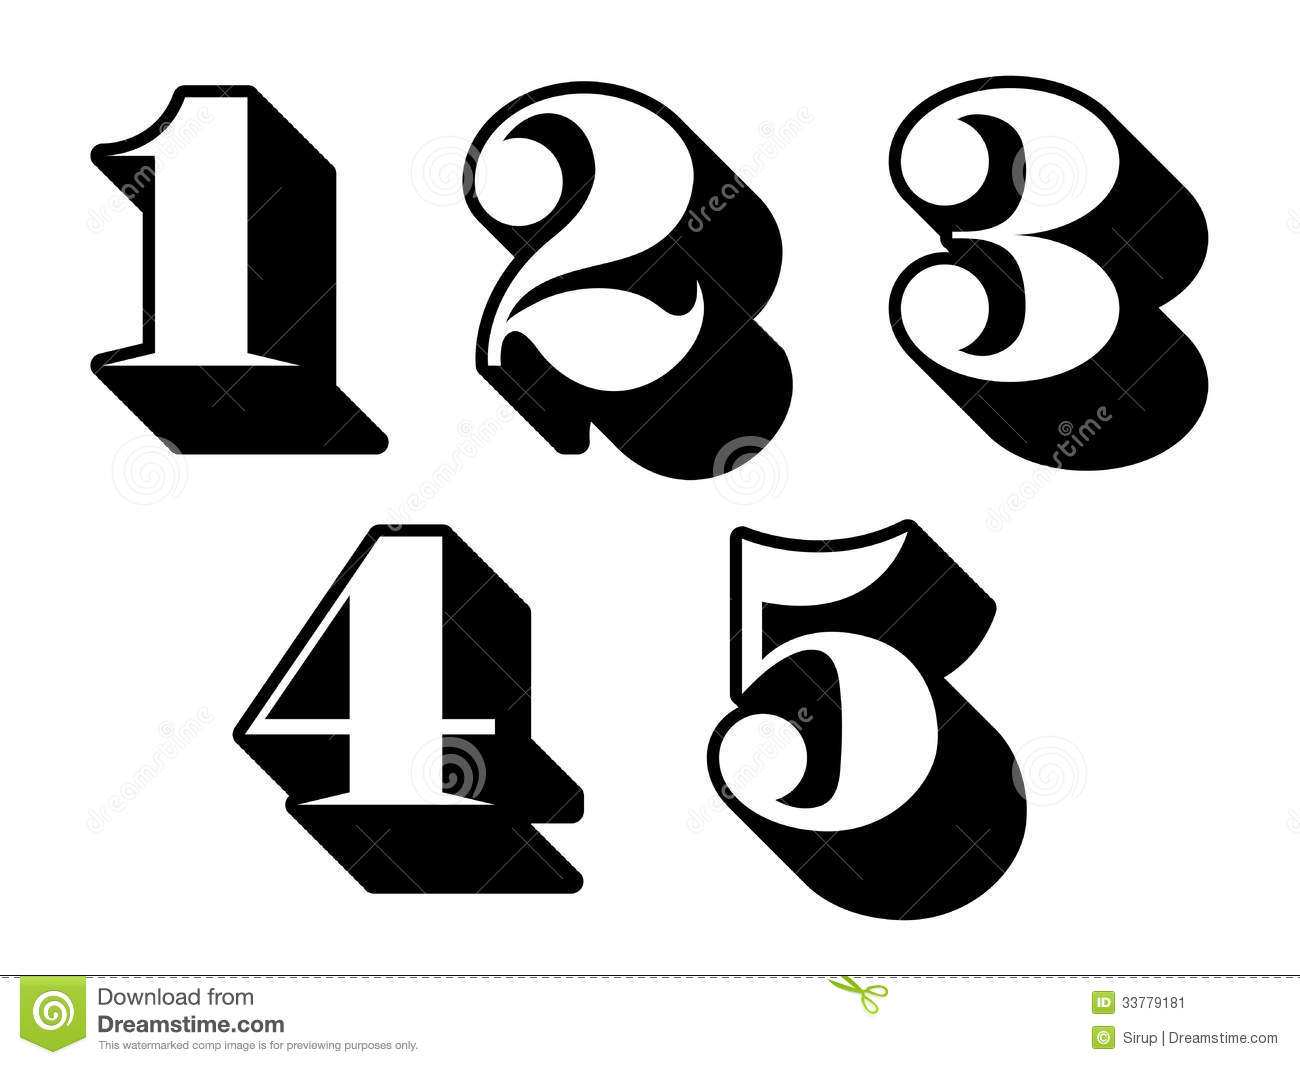 Black And White Three Dimensional Numbers Or Digits 1 2 3 4 5 In A